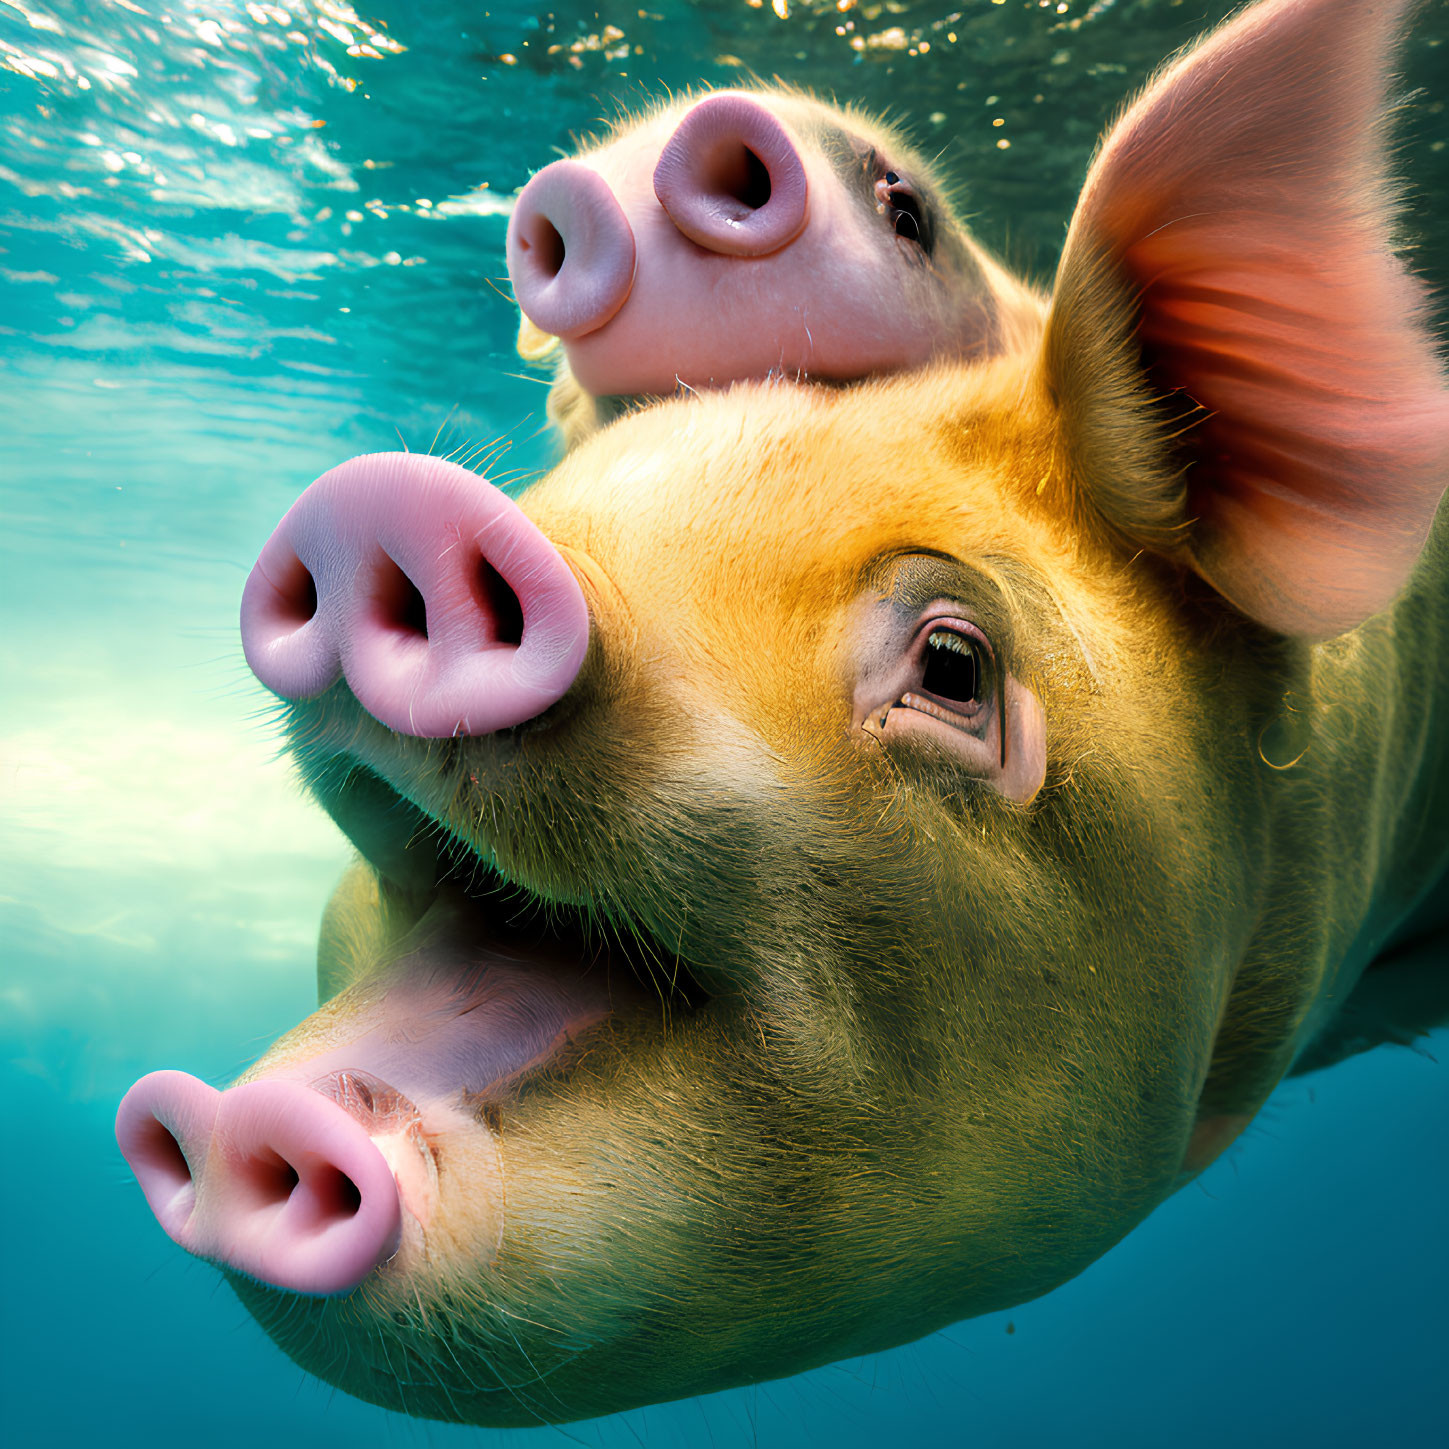 Two pigs in water, one submerged, one close-up.